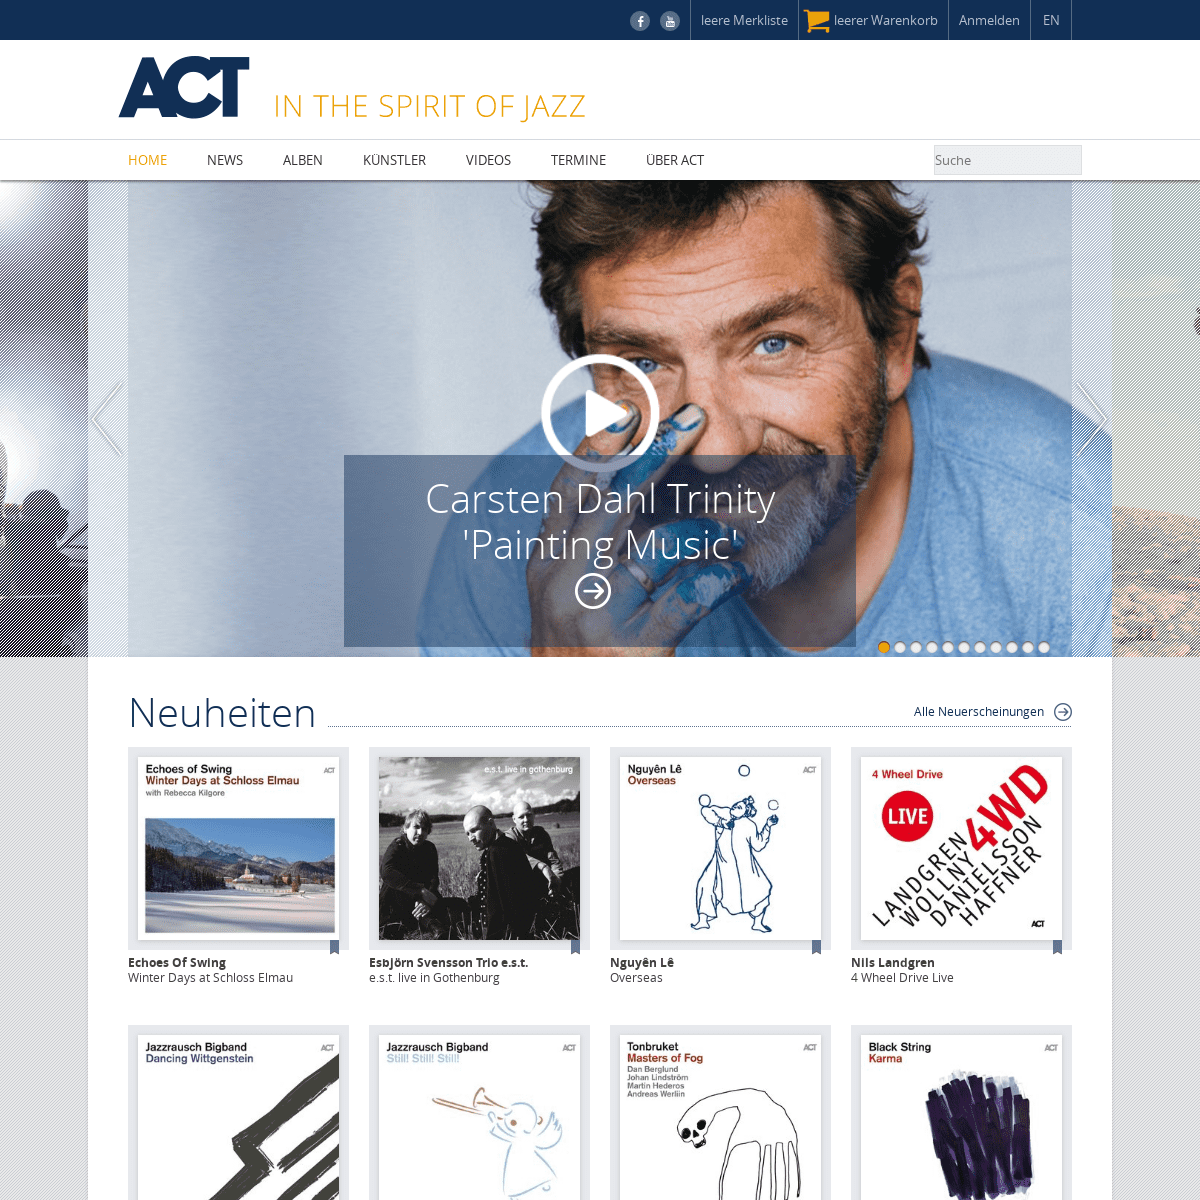 A complete backup of actmusic.com